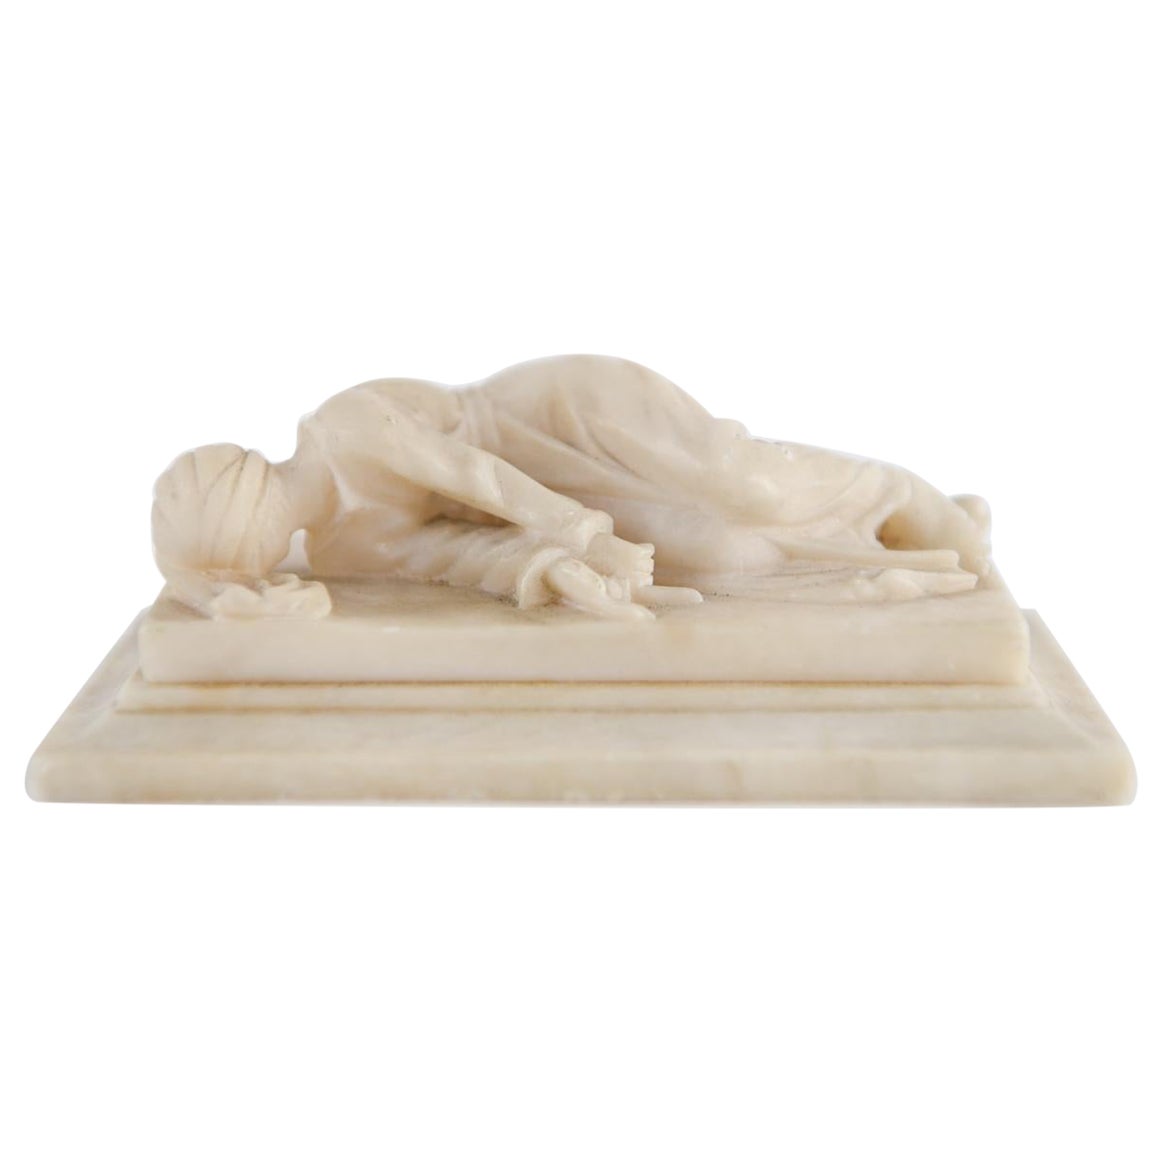 19th C. Alabaster Paperweight After Maderno, "The Martyrdom of Saint Cecilia"